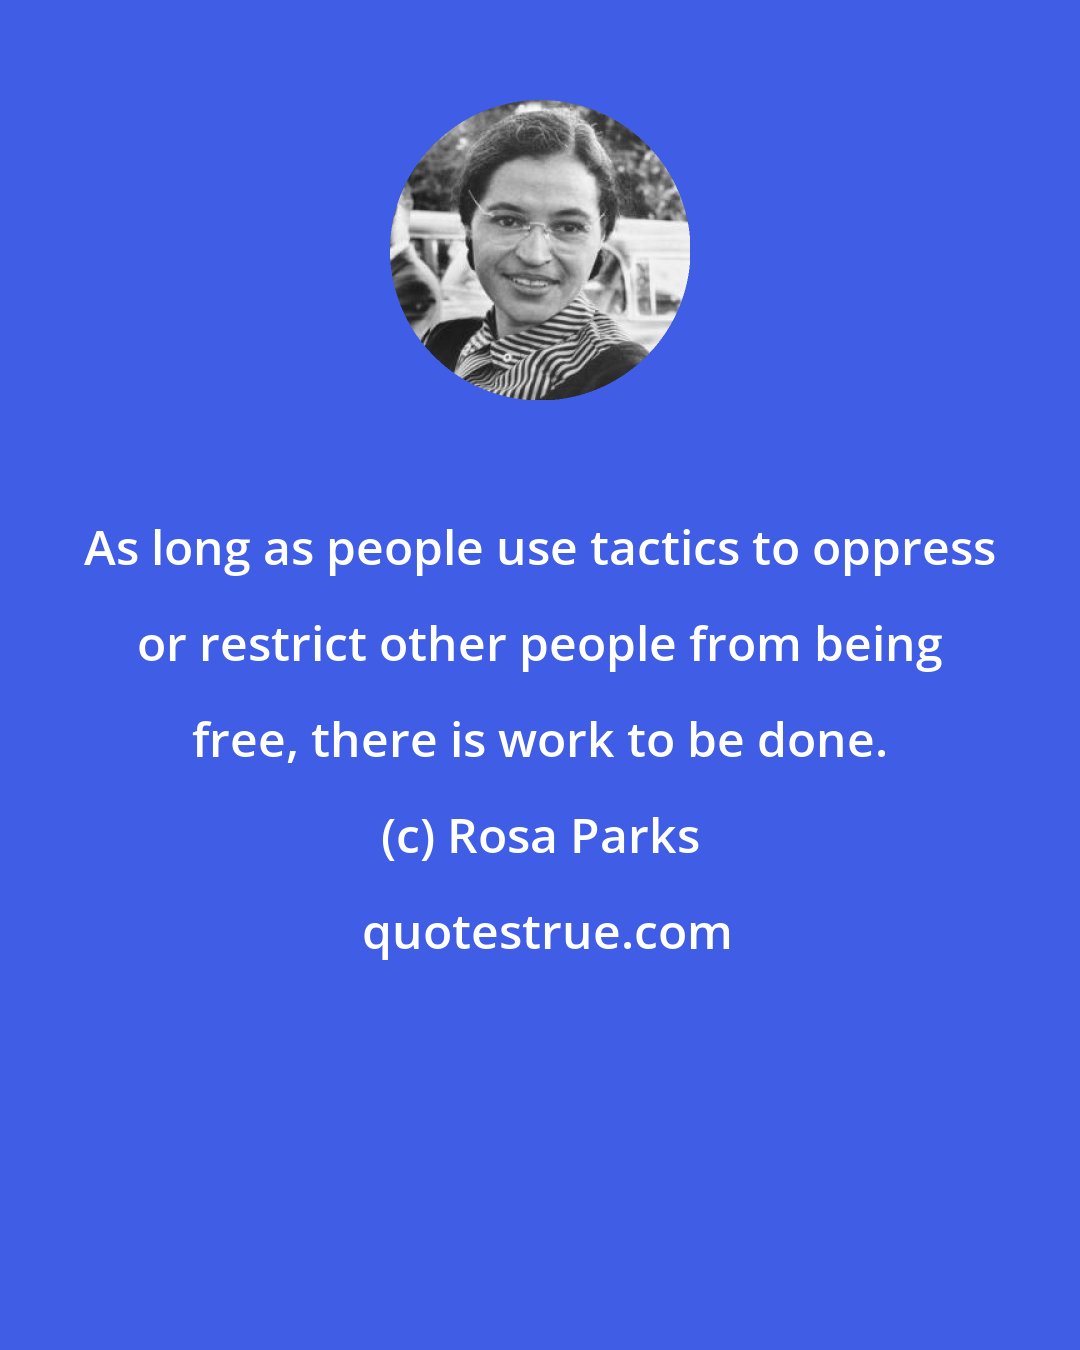 Rosa Parks: As long as people use tactics to oppress or restrict other people from being free, there is work to be done.